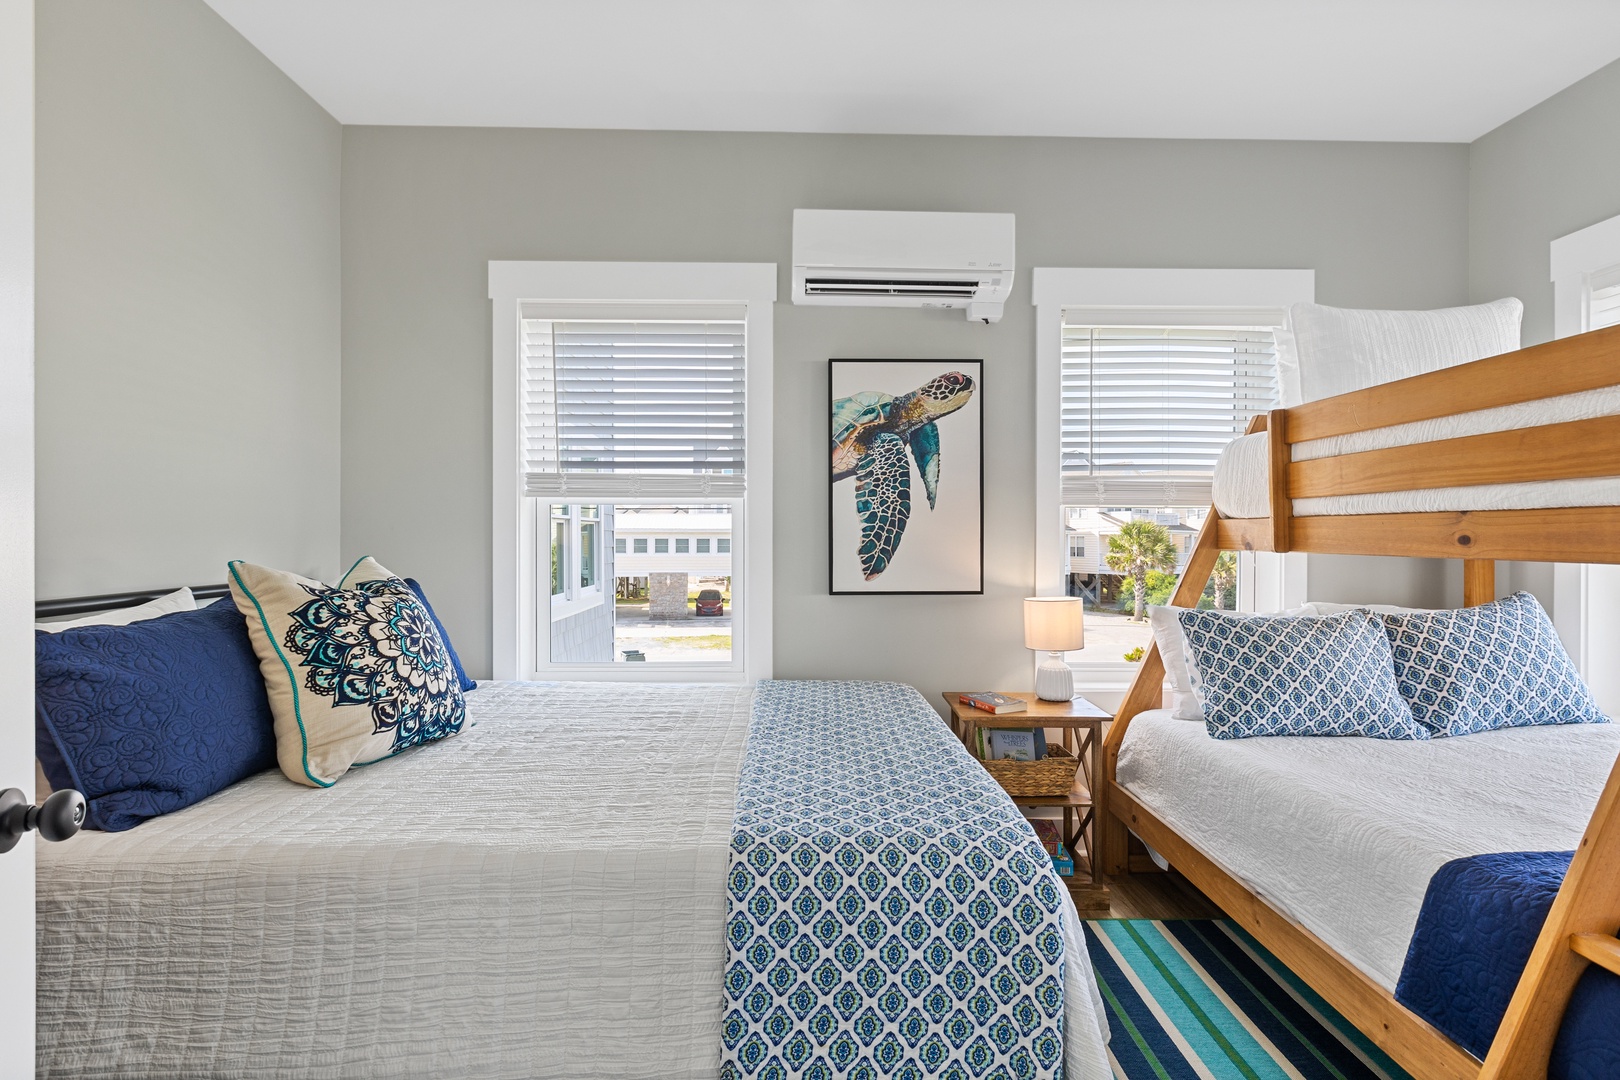 Bedroom 3 offers a queen-sized bed, a full/twin bunk bed, and a Smart TV